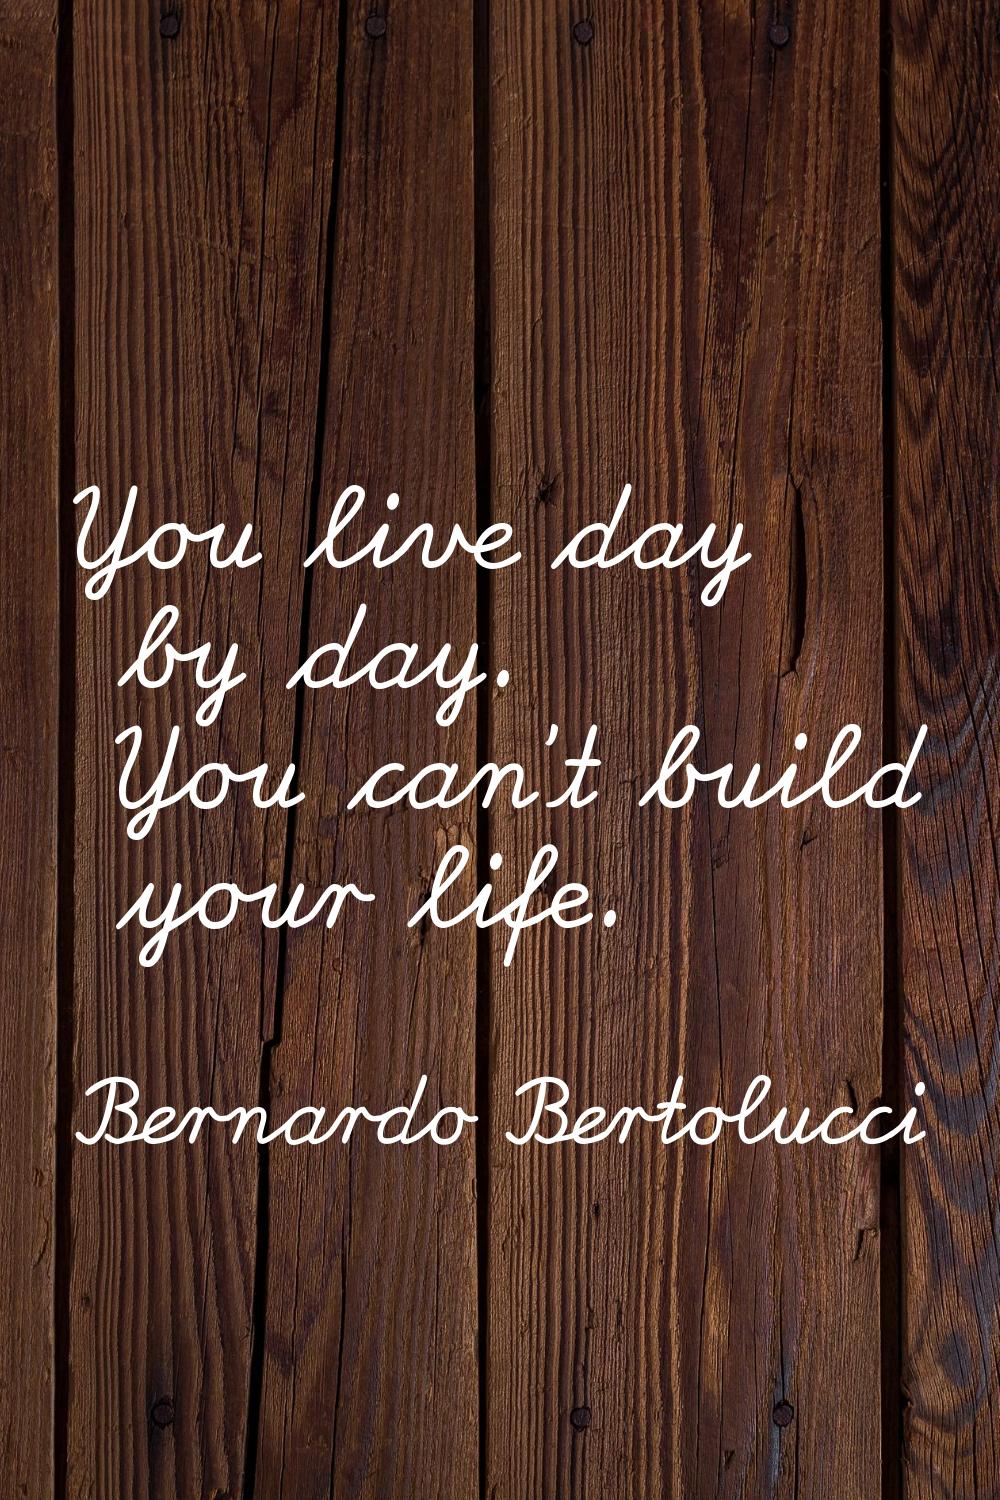 You live day by day. You can't build your life.